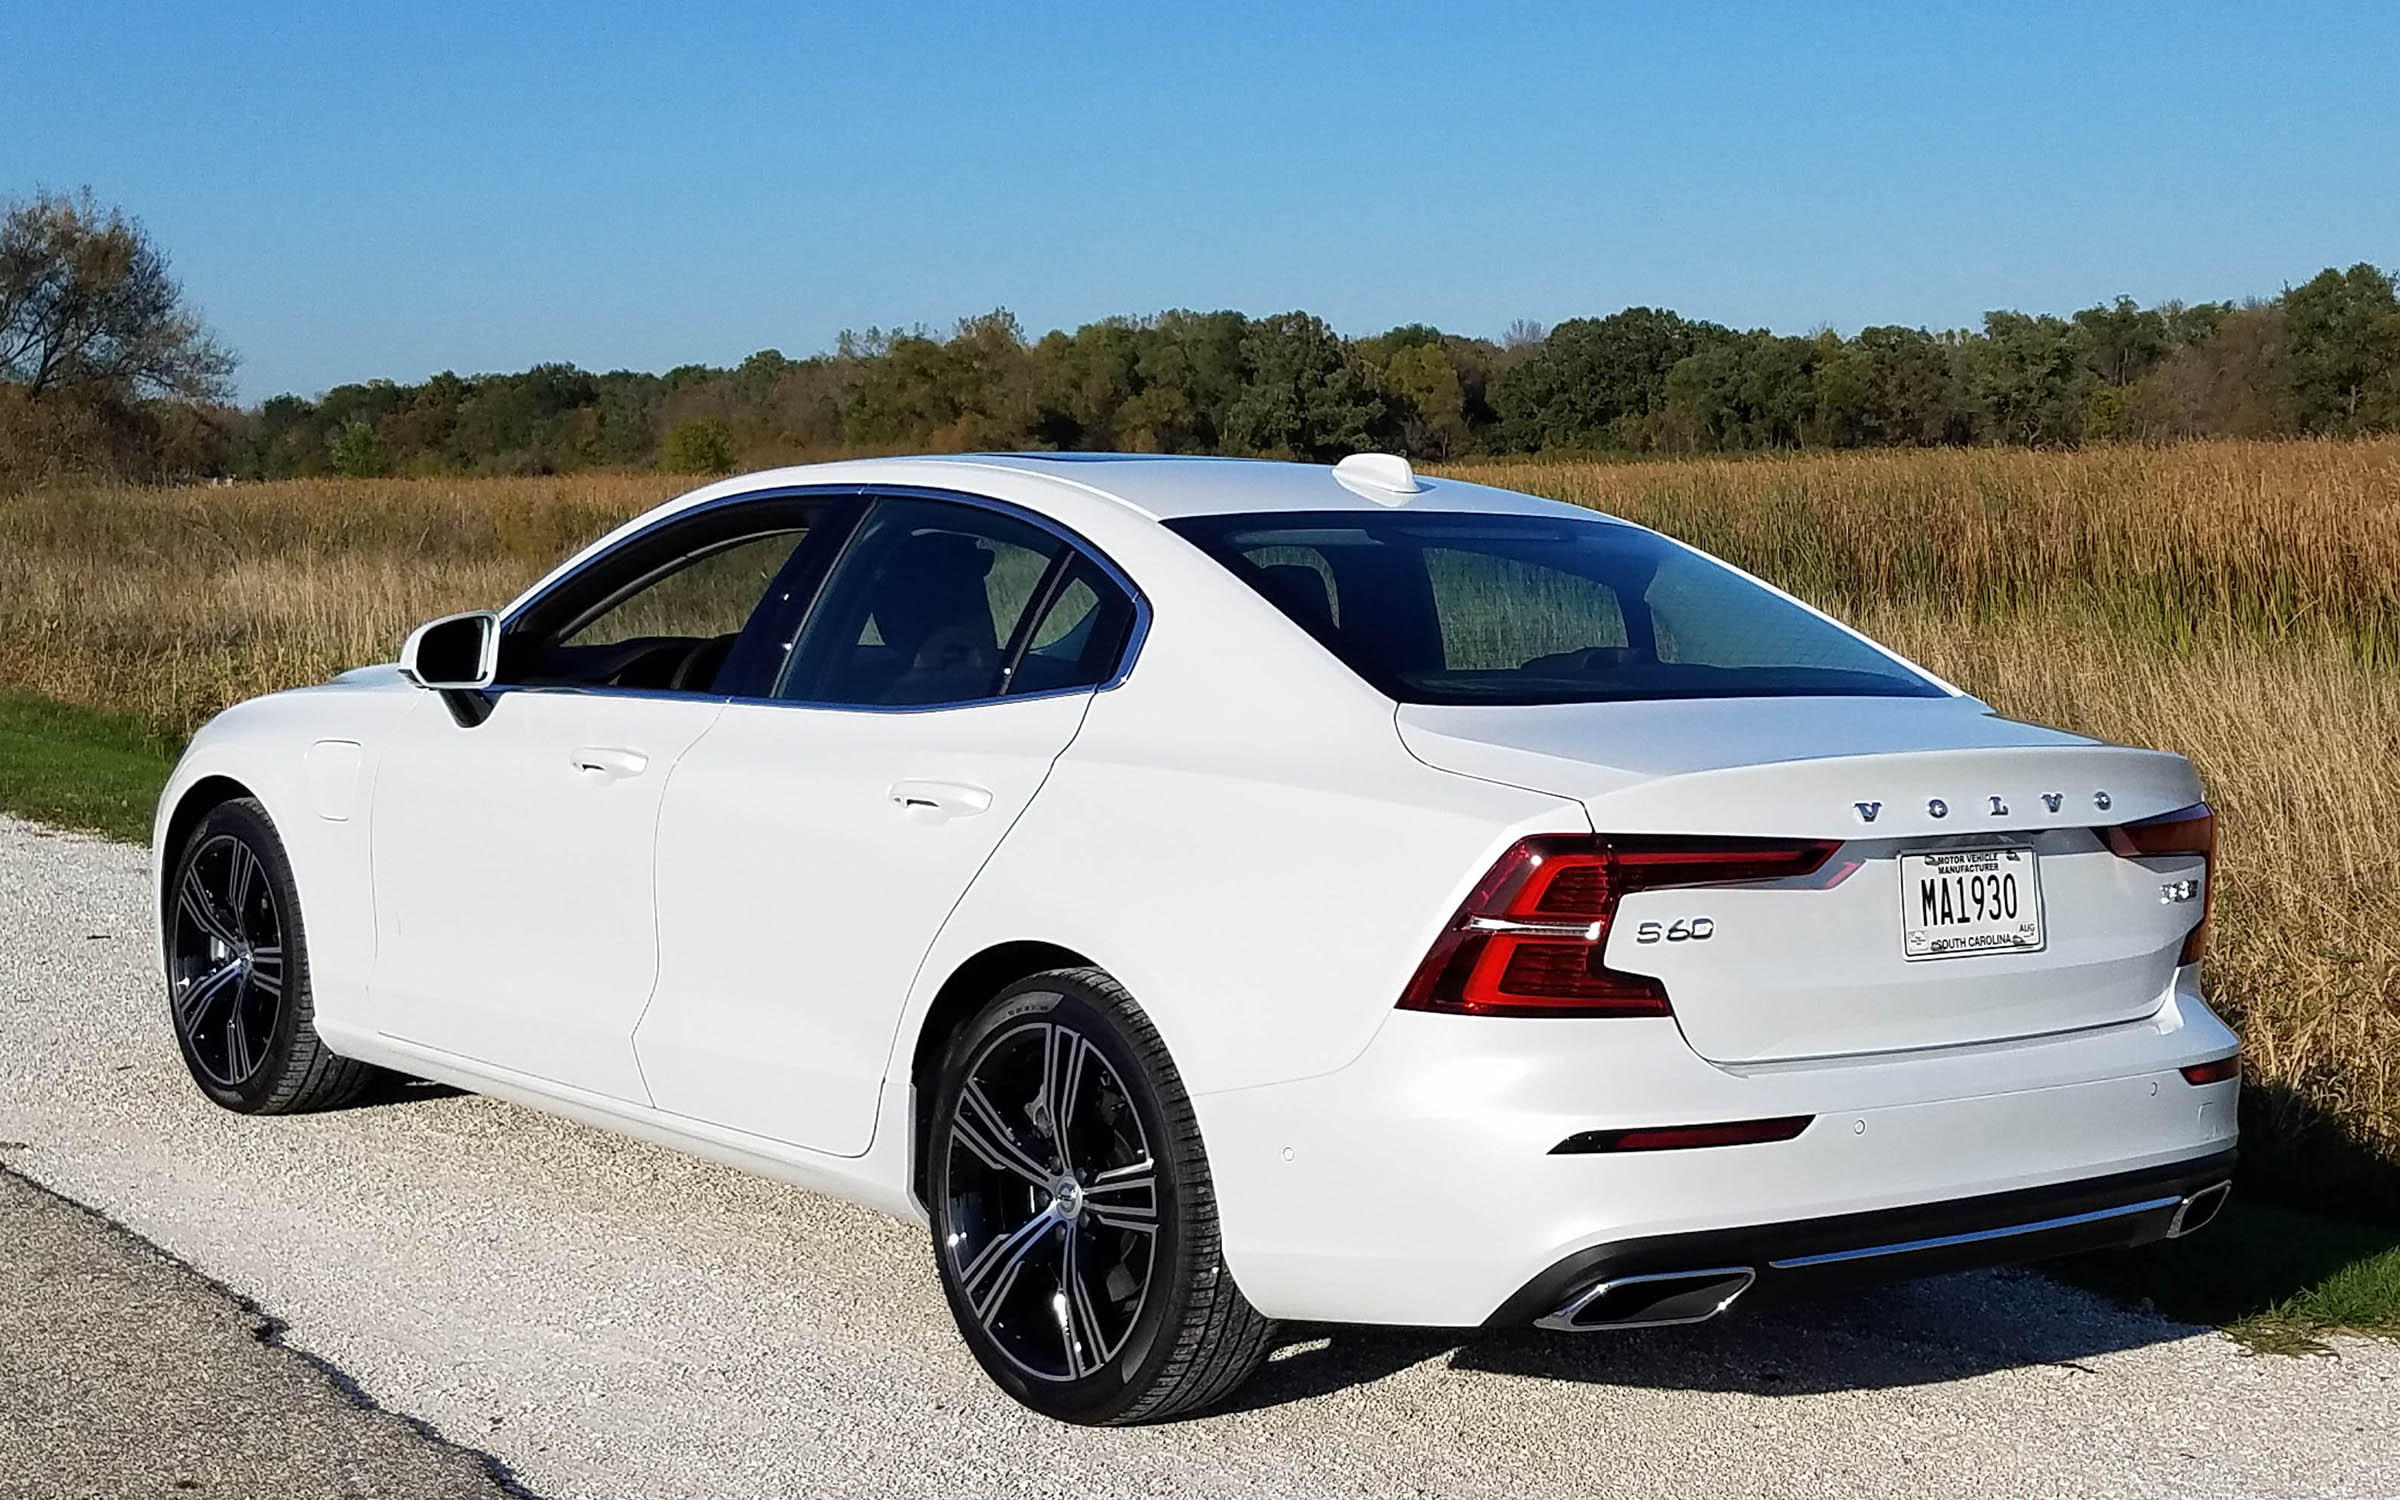 2020 Volvo S60 Hybrid Review - Cars Trend Today